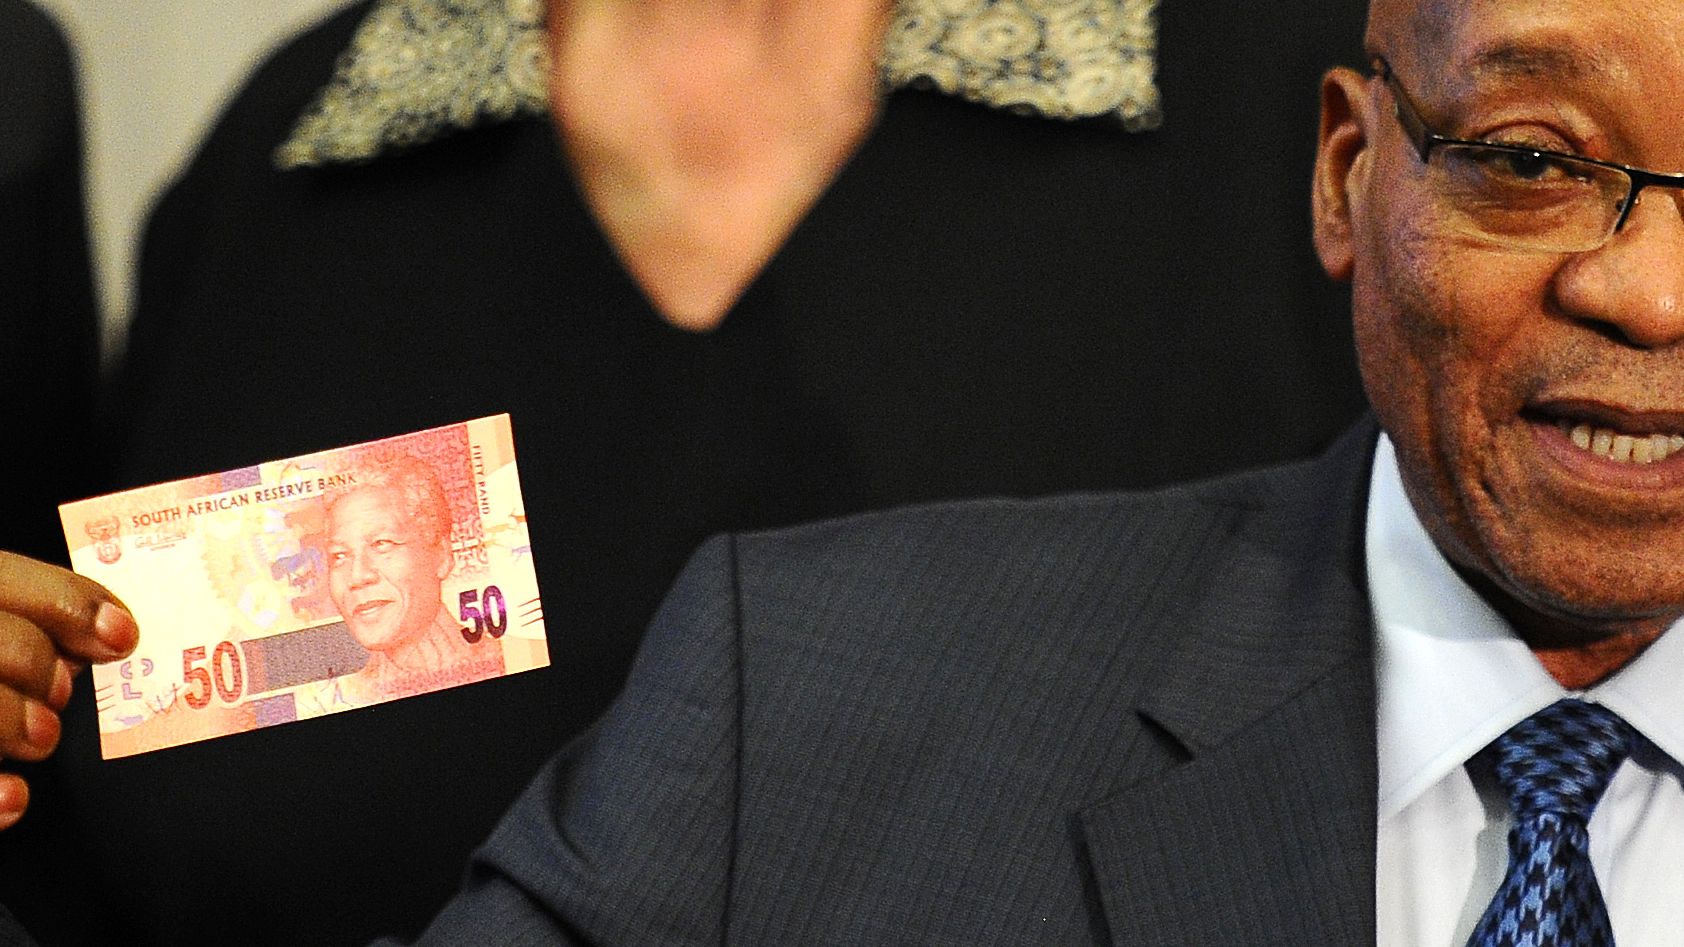 South African President Jacob Zuma shows a note featuring the country's former president Nelson Mandela.